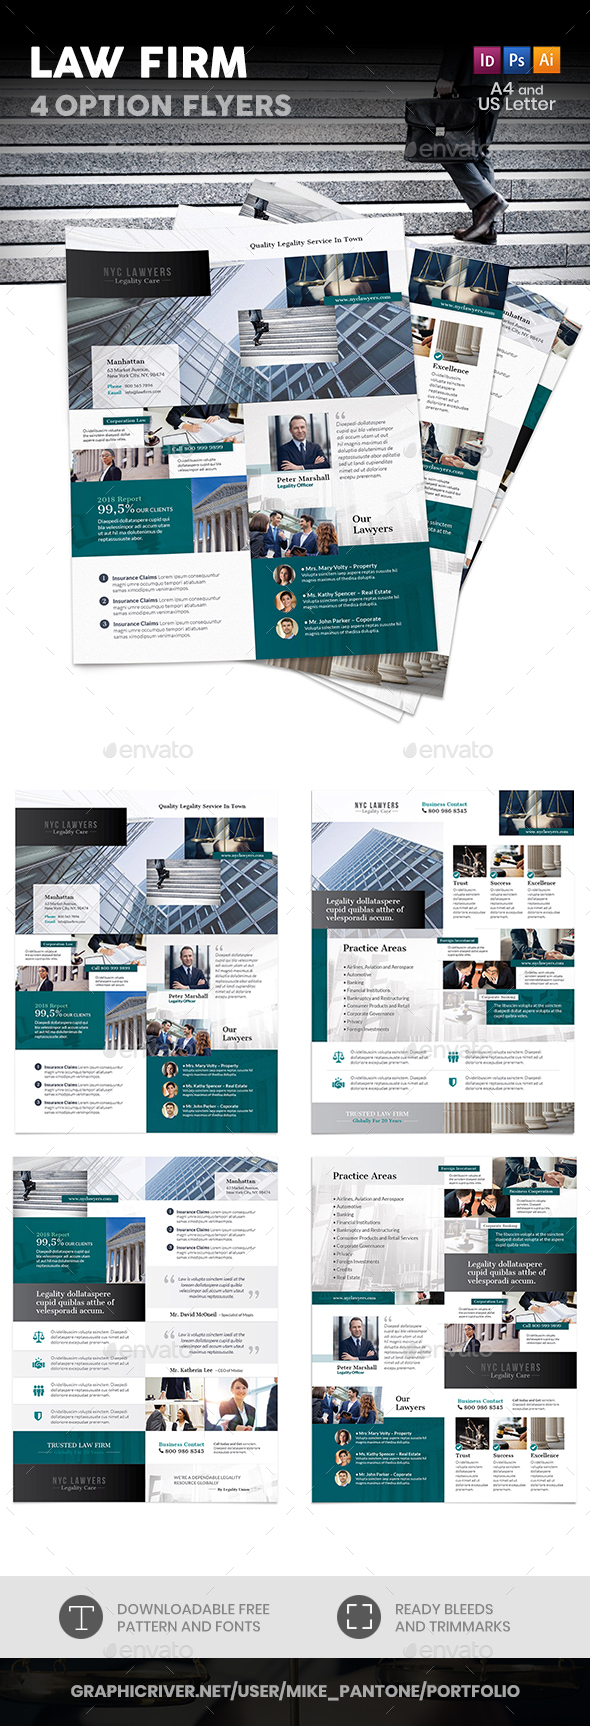 Law Firm Flyers 4 – 4 Options